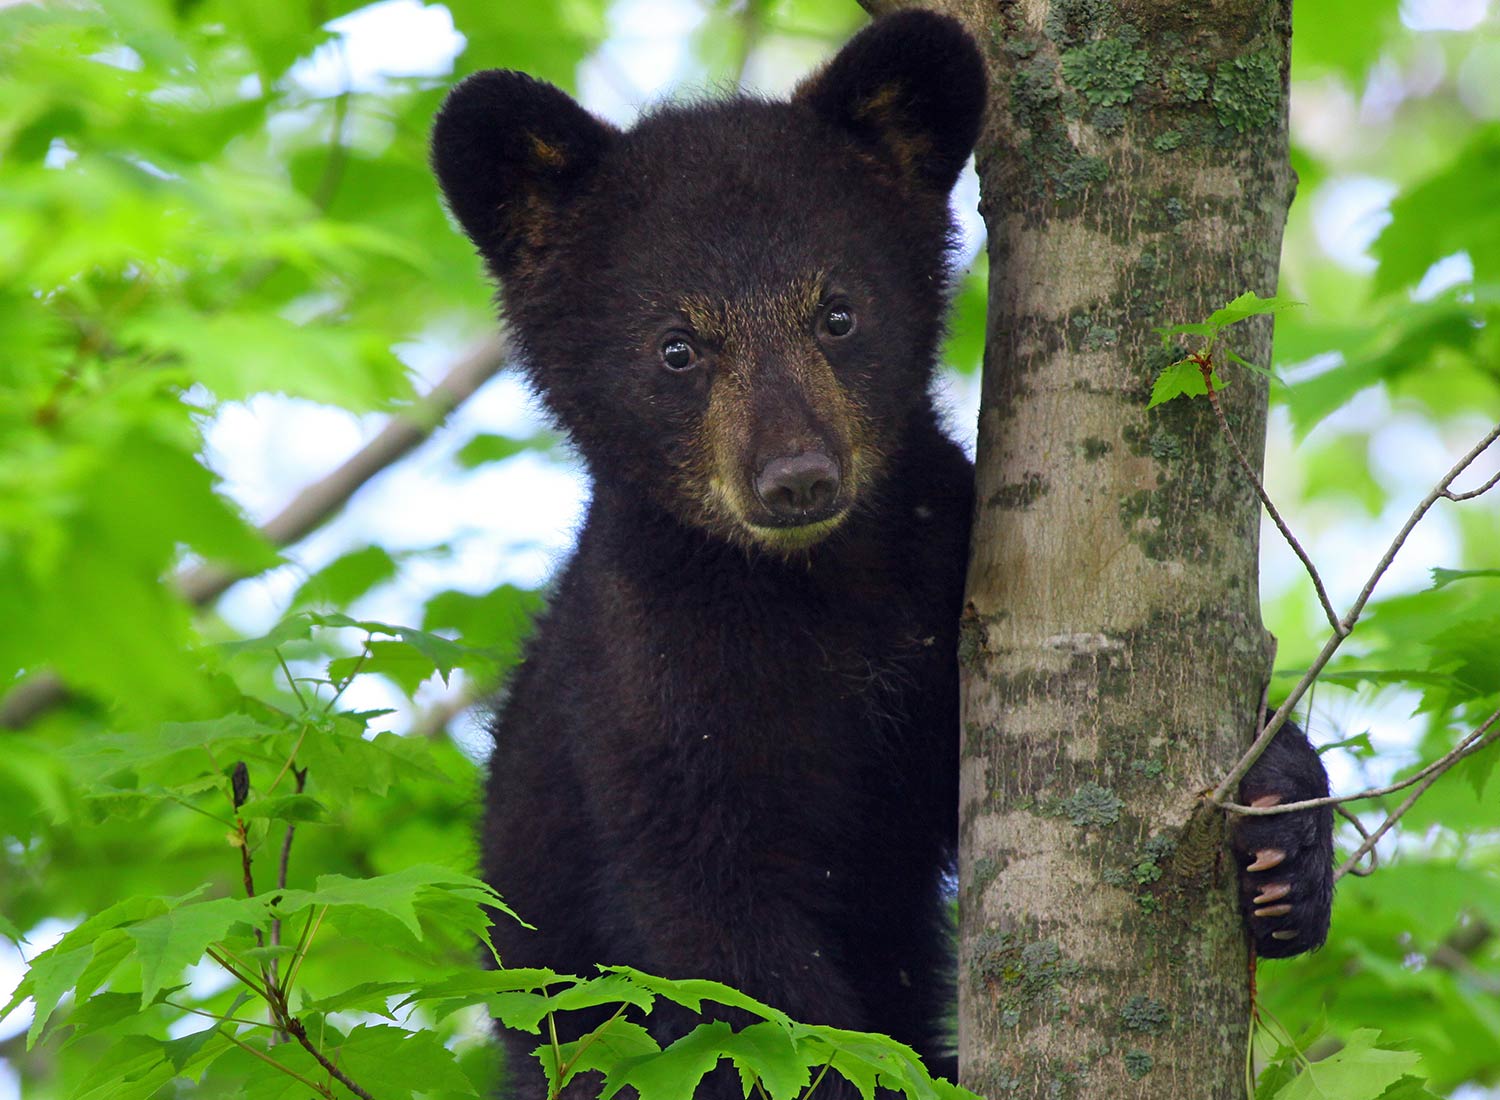 Photo by SHO Farm's Wildlife Biologist Susan C. Morse | one of our land stewardship practices is to ensure safe & healthy habitat for wildlife like this bear cub